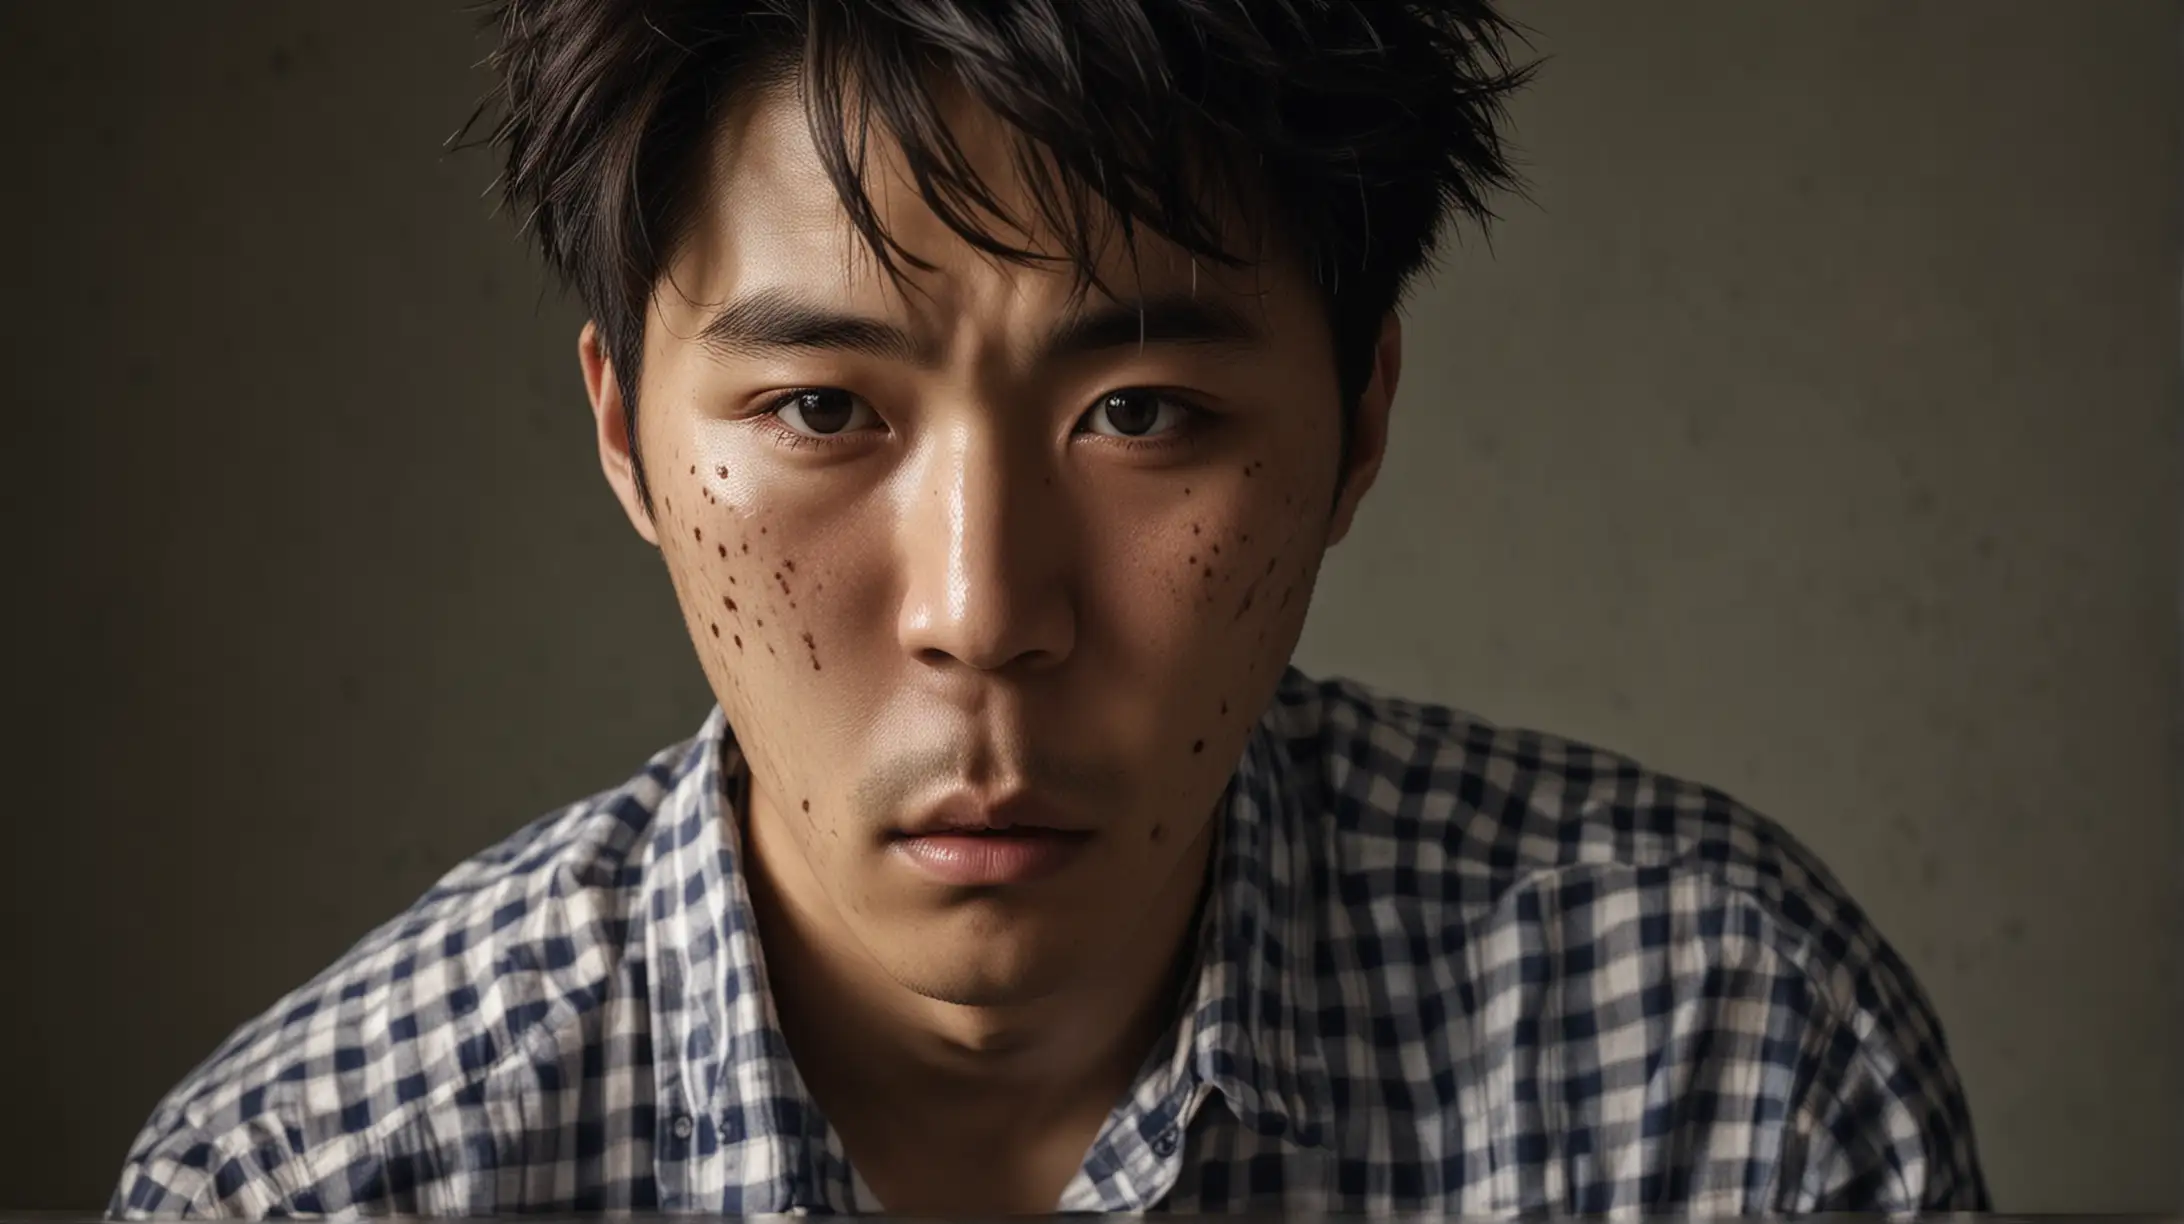 Portrait of a Korean Man in Checkered Shirt with Cinematic Lighting